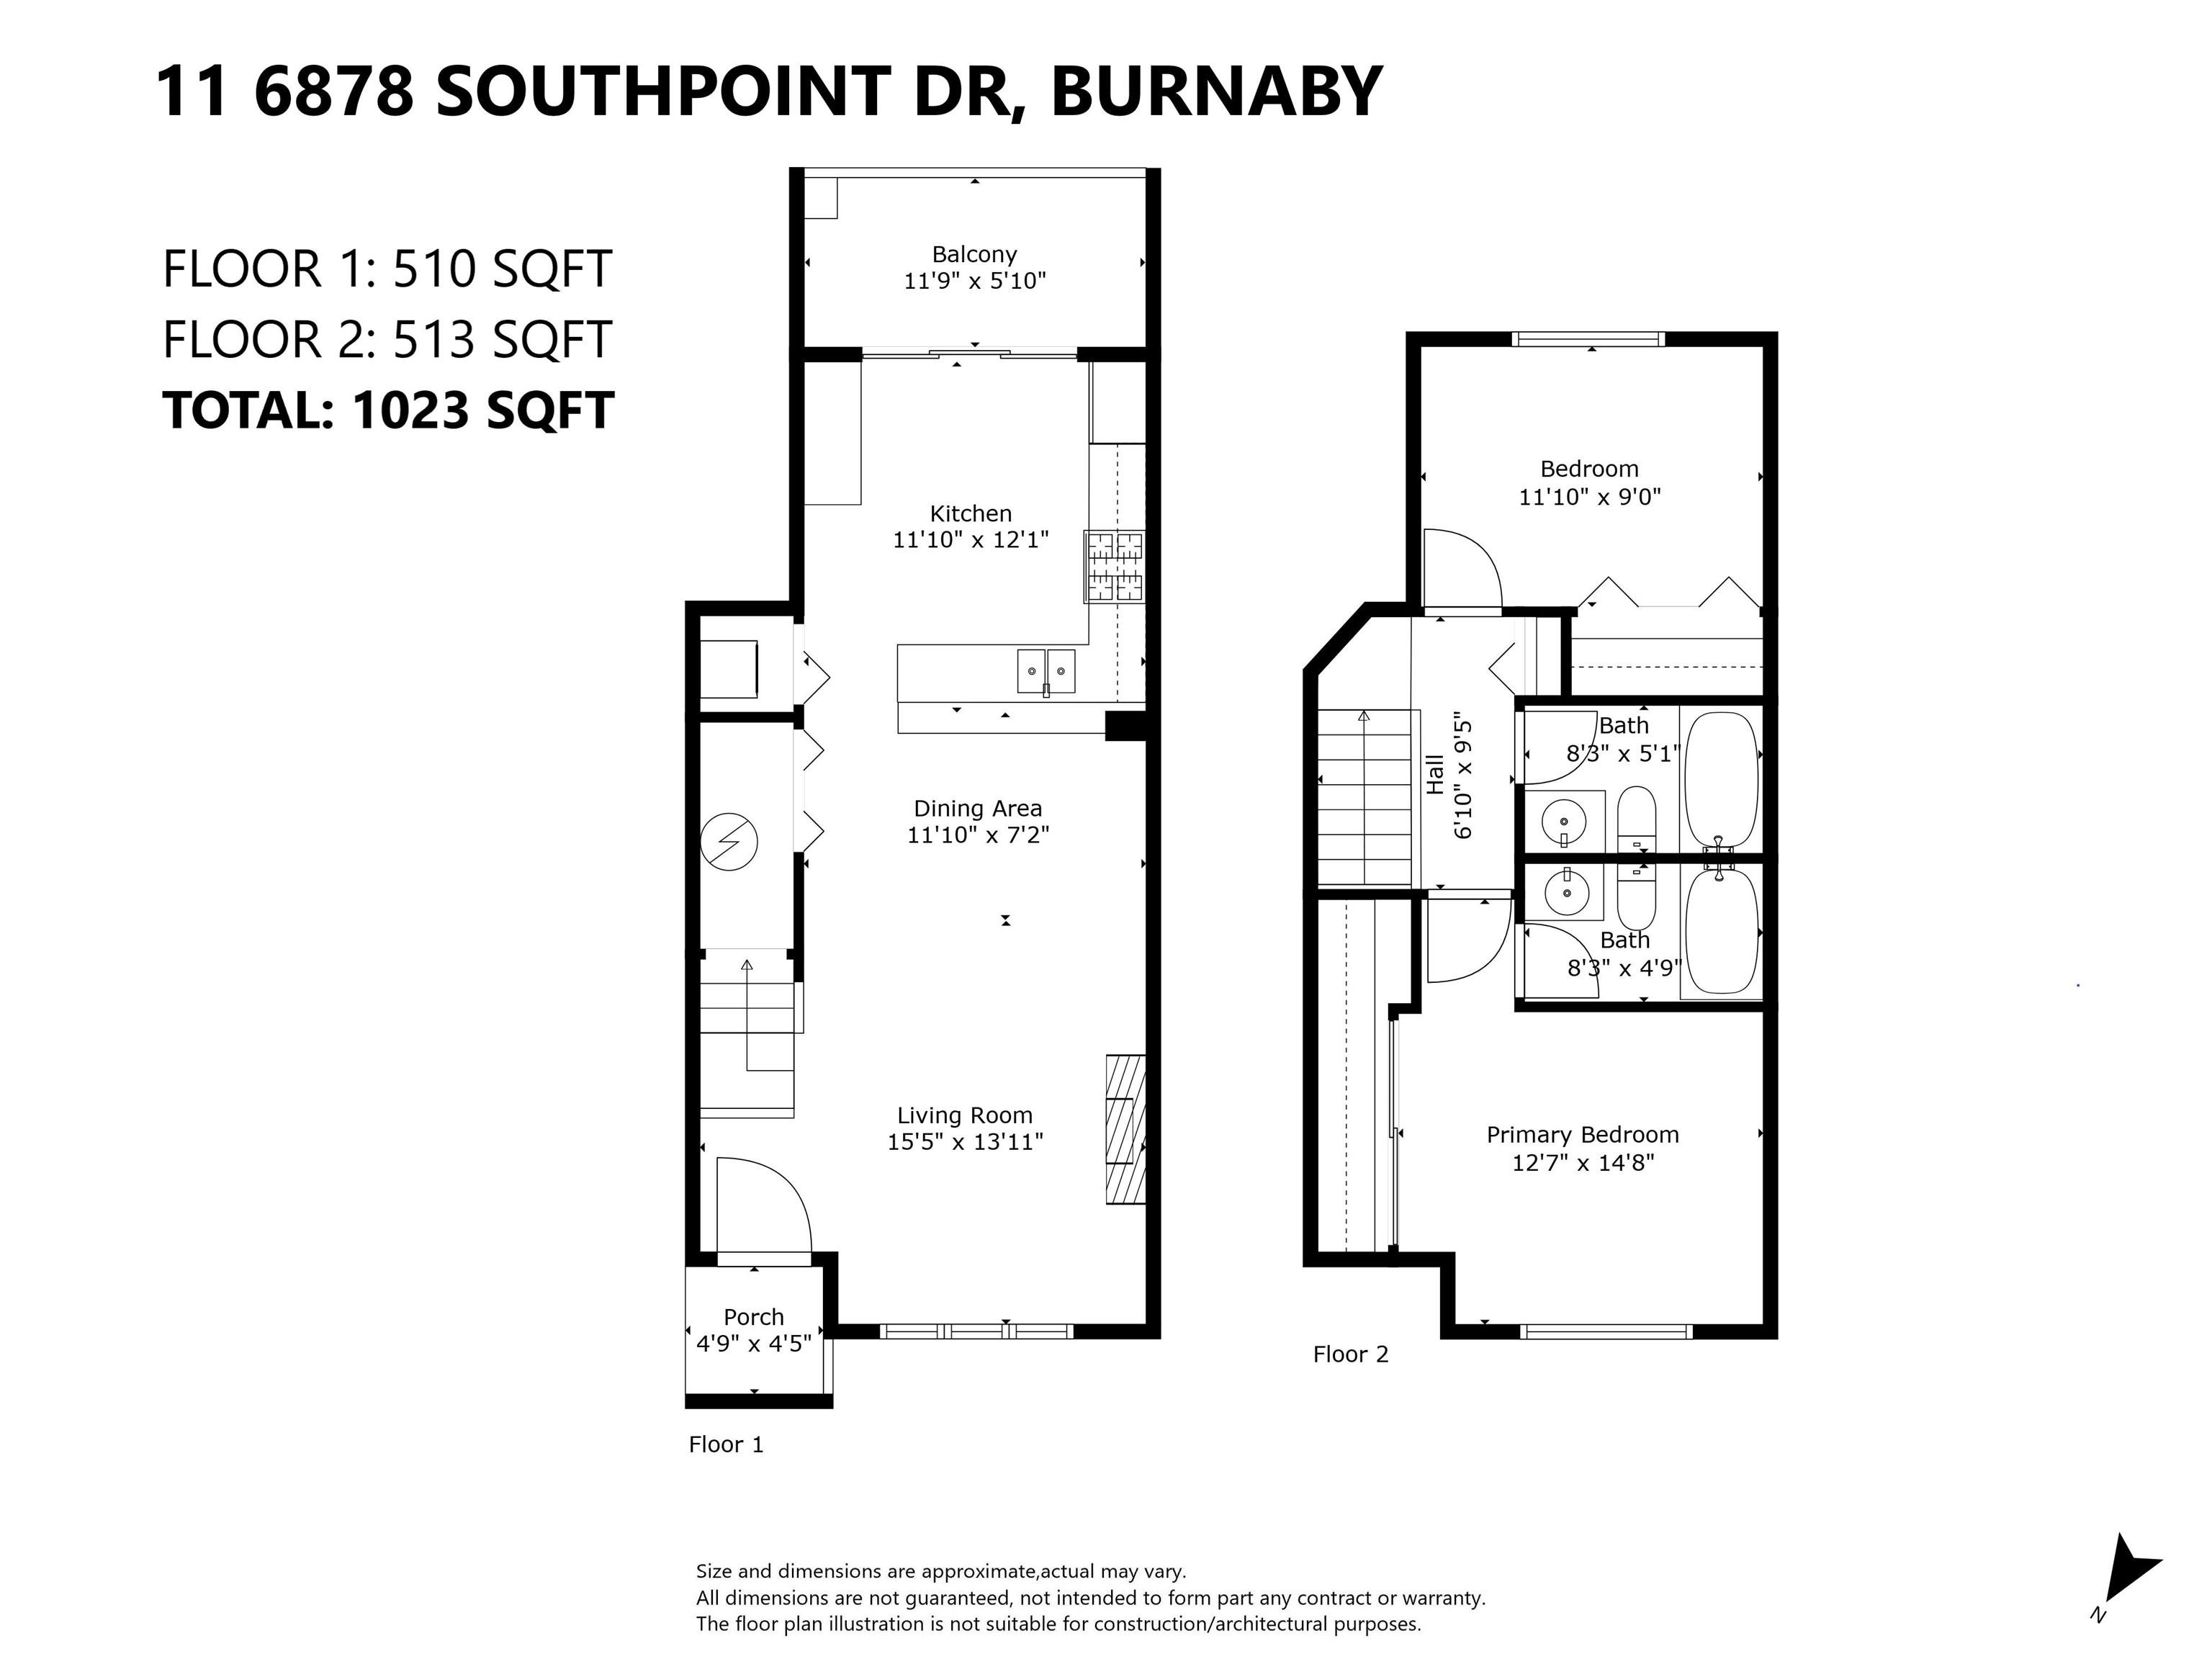 Listing image of 11 6878 SOUTHPOINT DRIVE